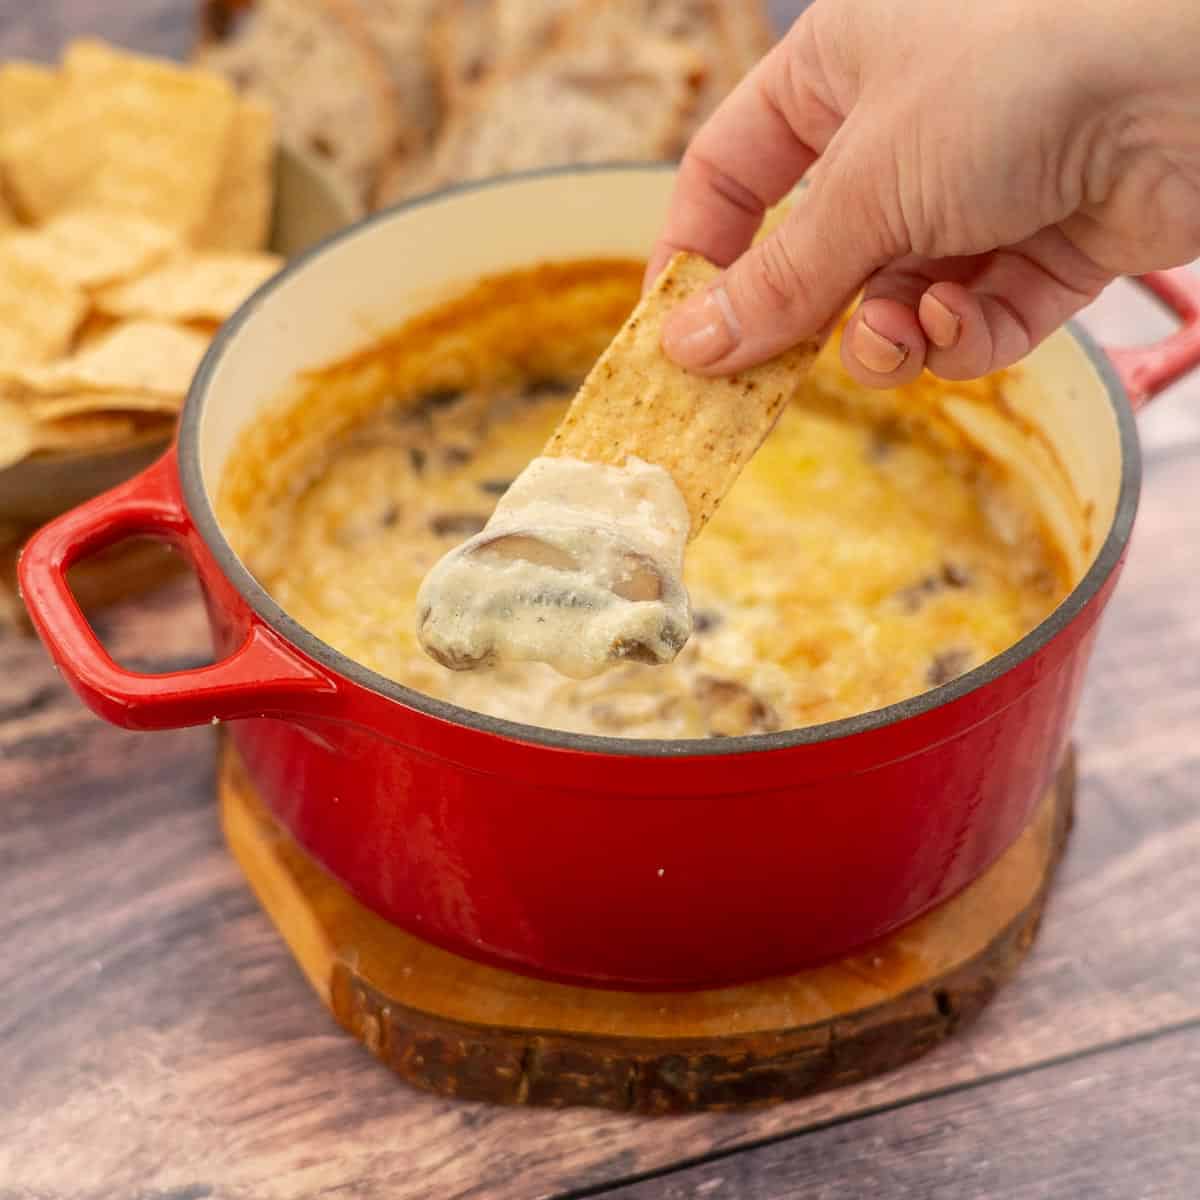 A hand scooping baked cheese dip fro a red dish with a corn tortilla chip.